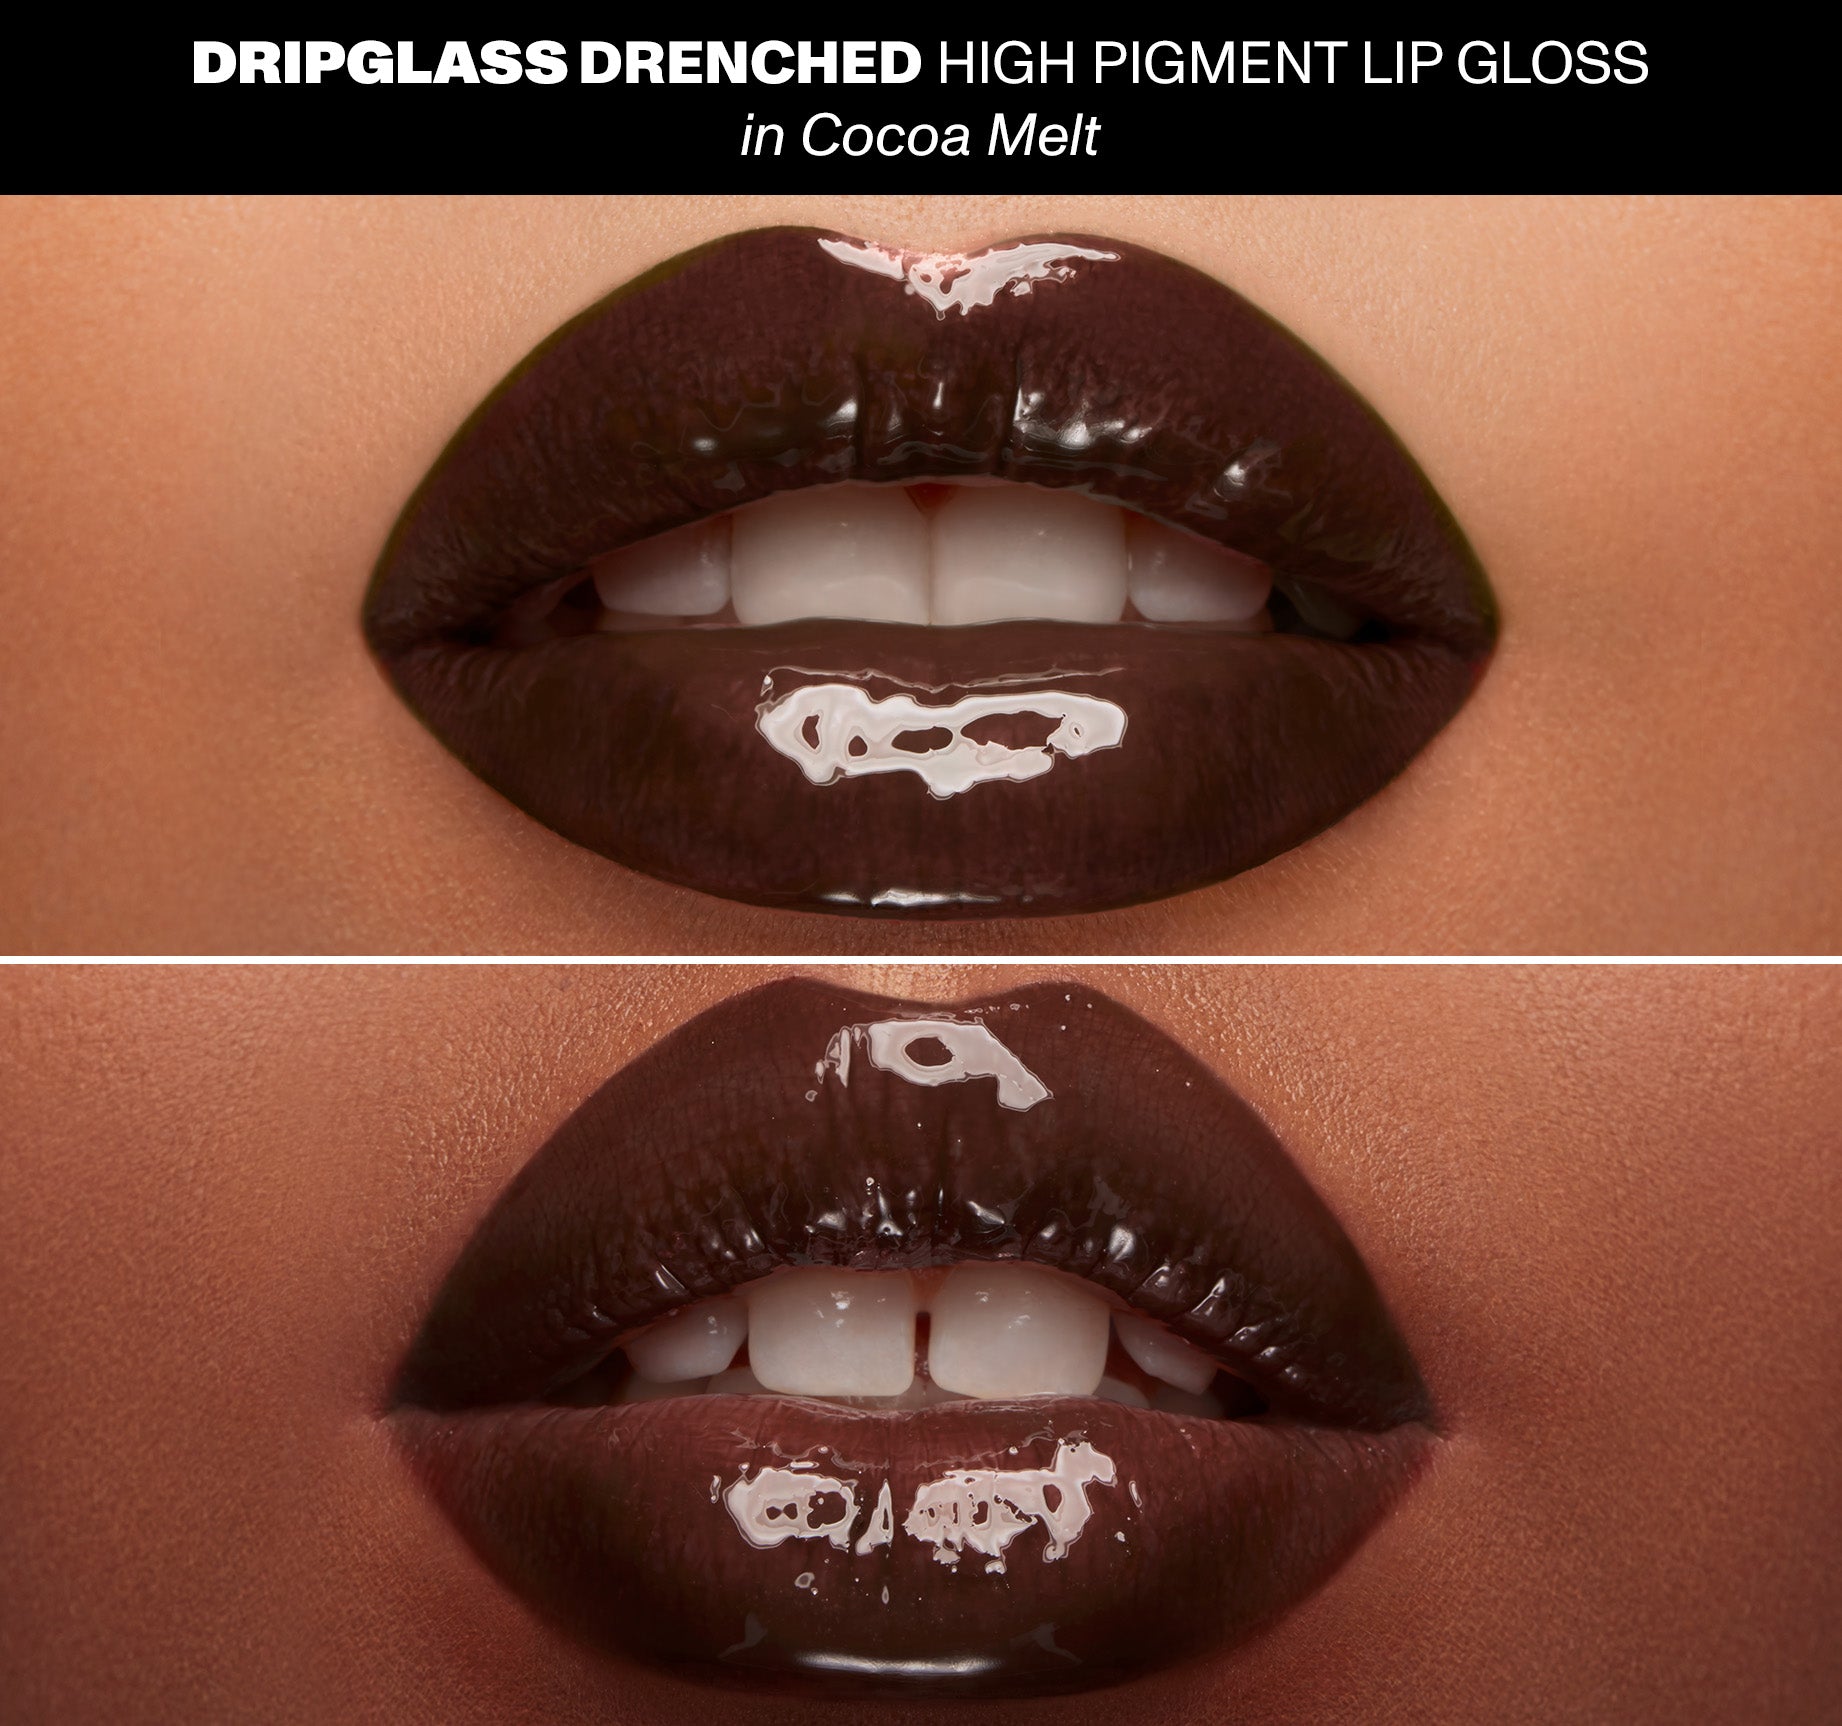 Dripglass Drenched High Pigment Lip Gloss - Morphe